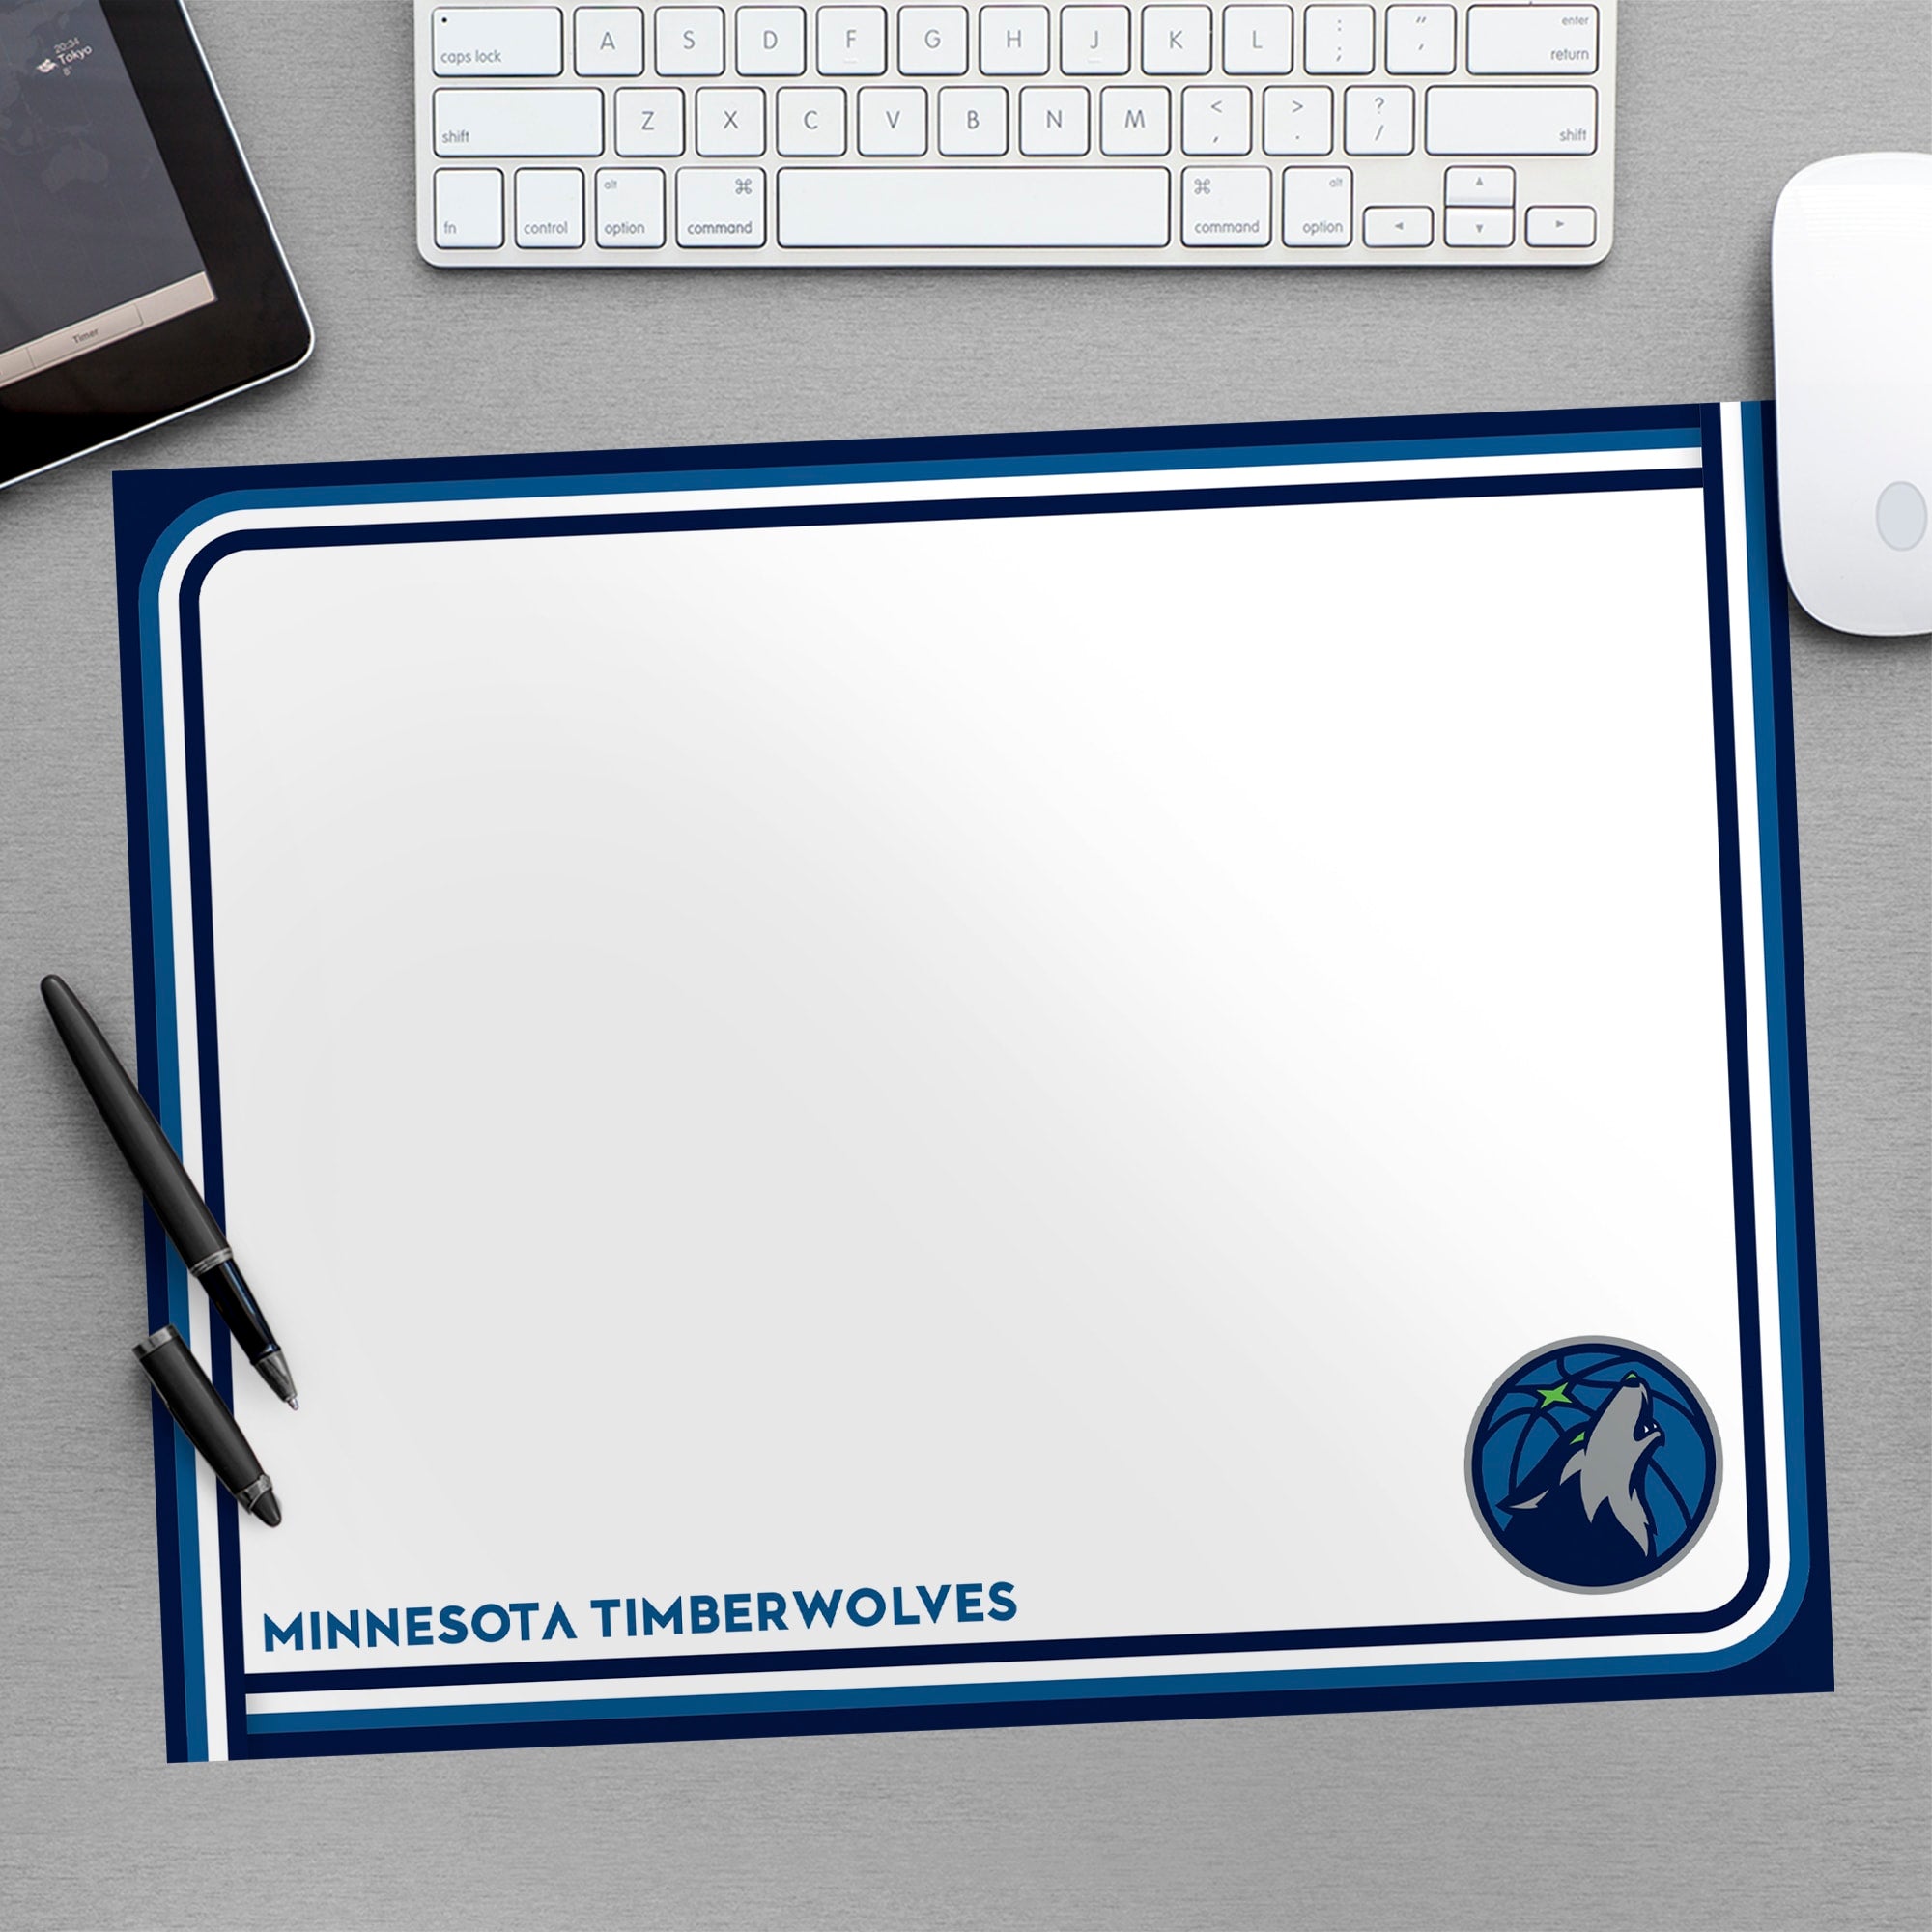 Minnesota Timberwolves for Minnesota Timberwolves: Dry Erase Whiteboard - Officially Licensed NBA Removable Wall Decal Large by